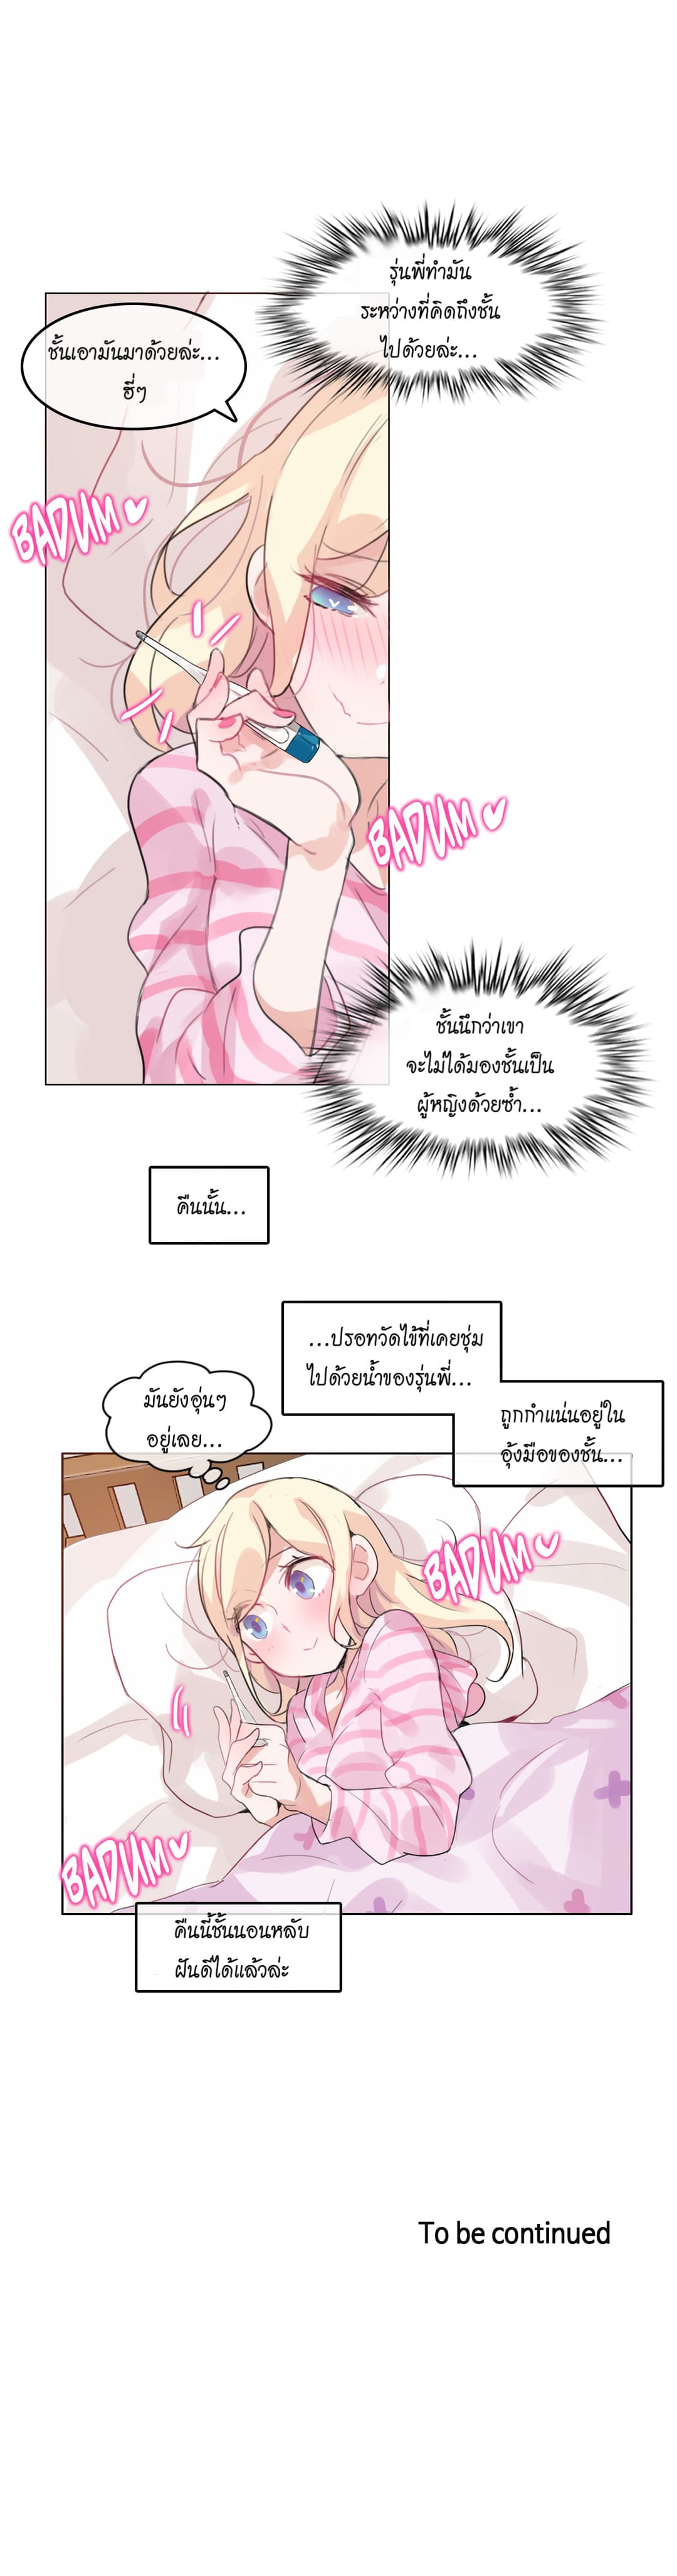 A Pervert’s Daily Life 17 (20)